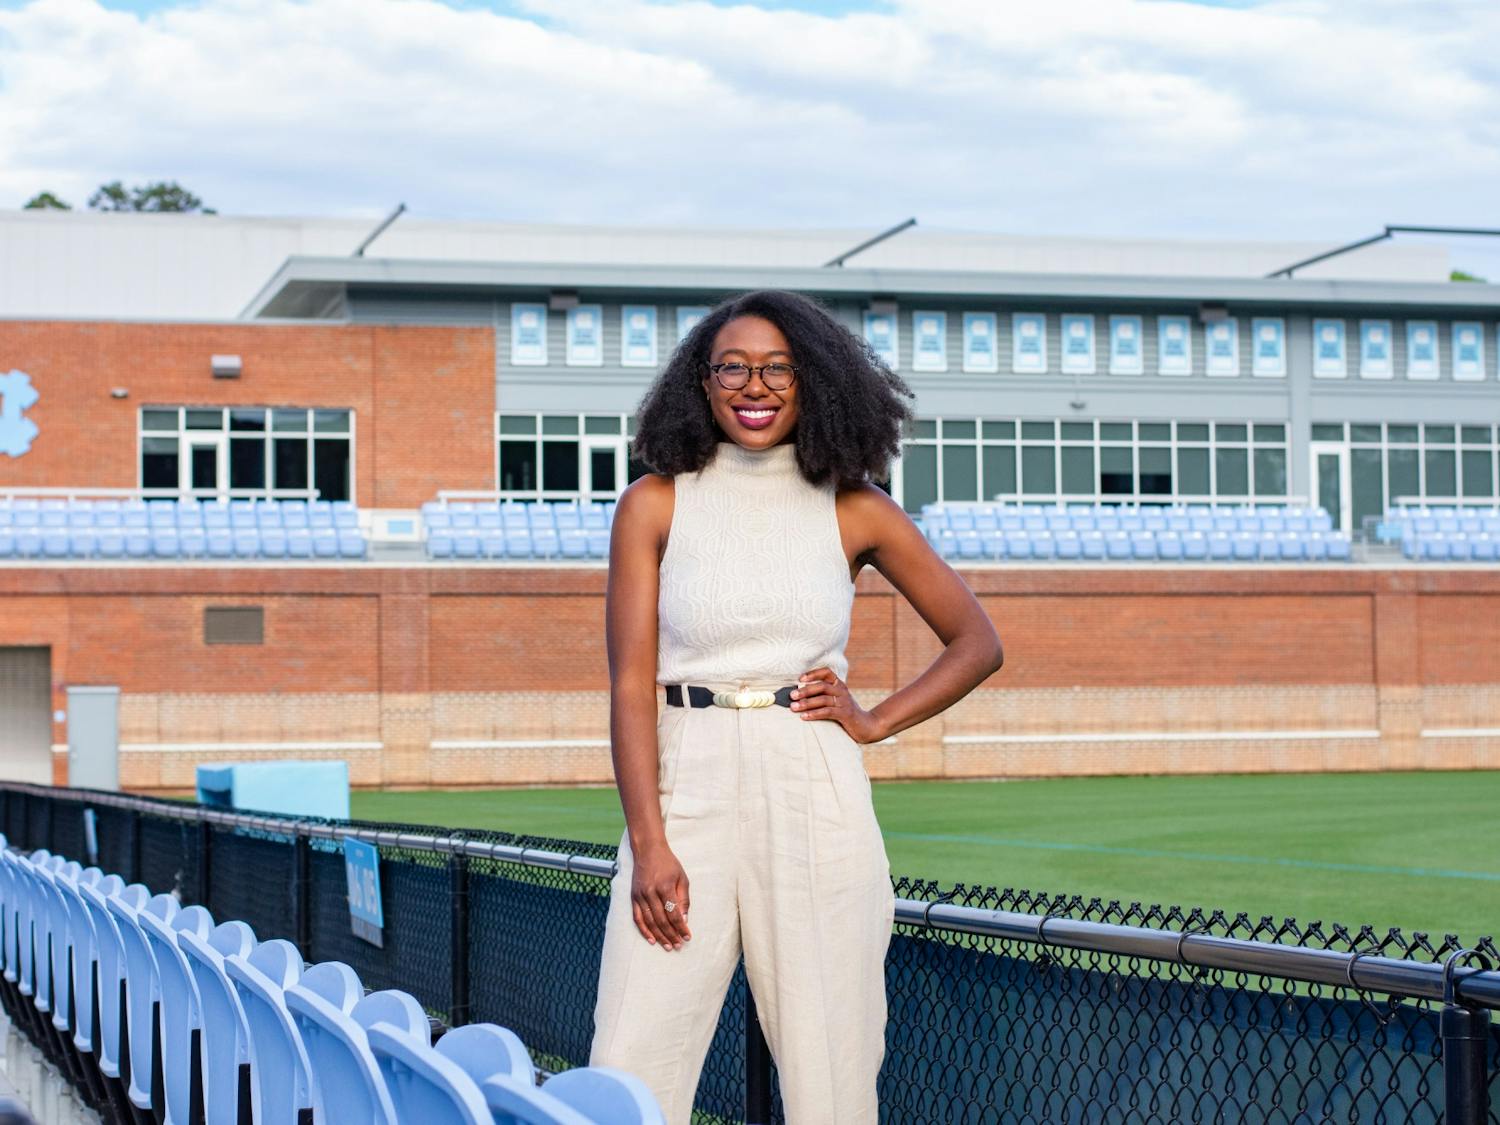 Amari Pollard is a second year graduate student studying communications. Through Amari Pollard's ESPN halftime show, she serves to amplify Black voices and Women's Lacrosse.